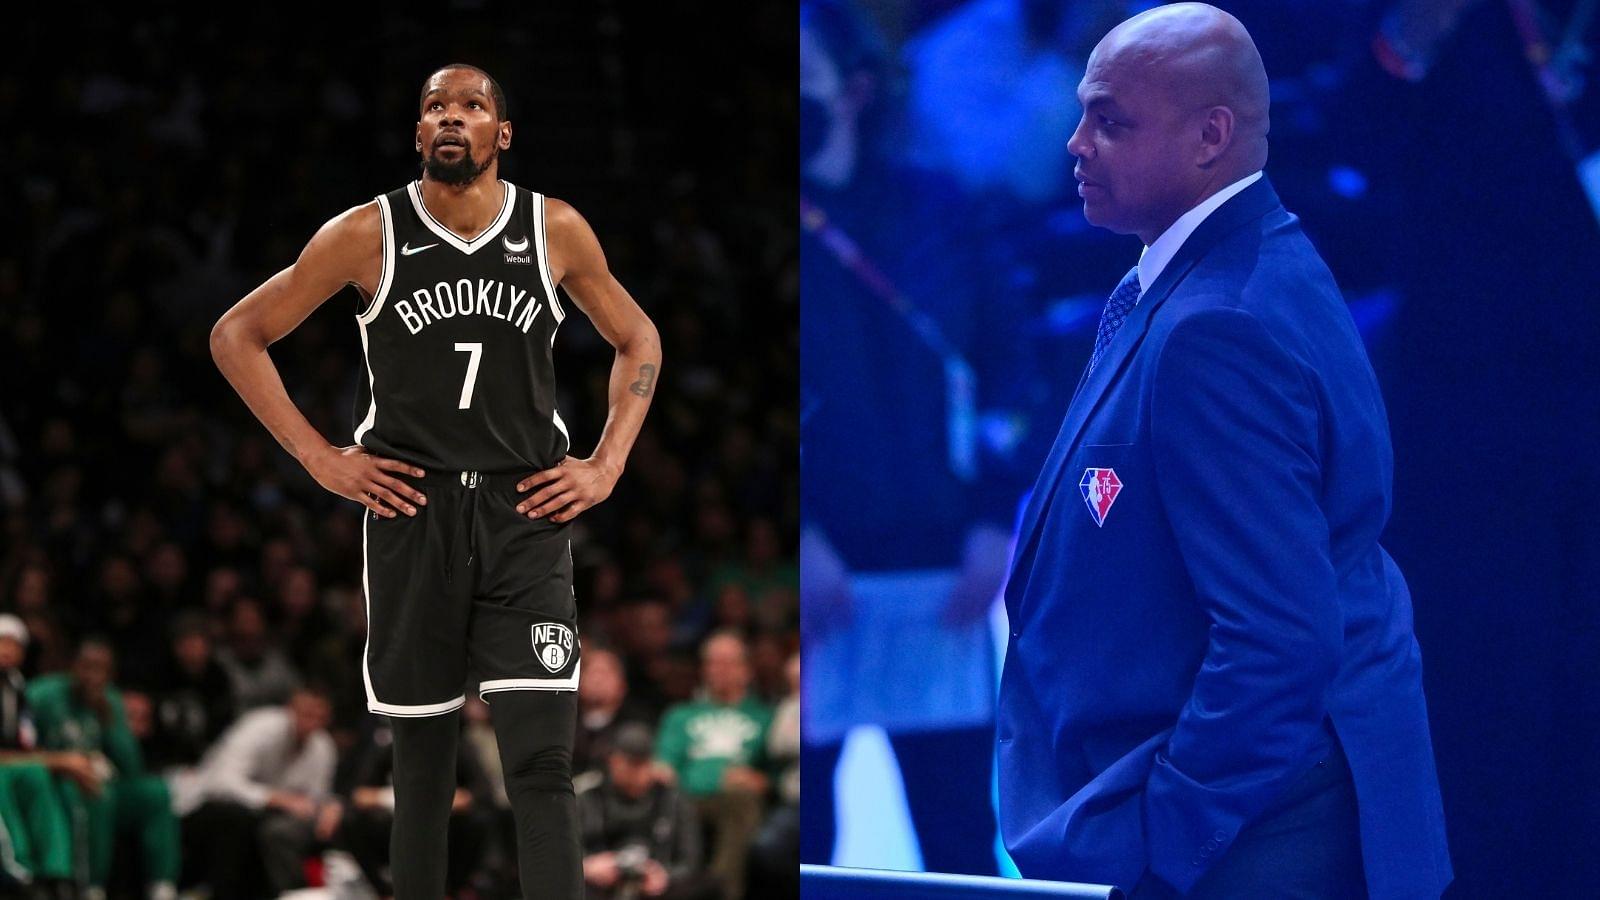 "Kevin Durant, if you ain't driving the bus, don't walk around talkin' bout you a champion!": Charles Barkley questions Slim Reaper's leadership citing Warriors Chips, Shaquille O'Neal agrees